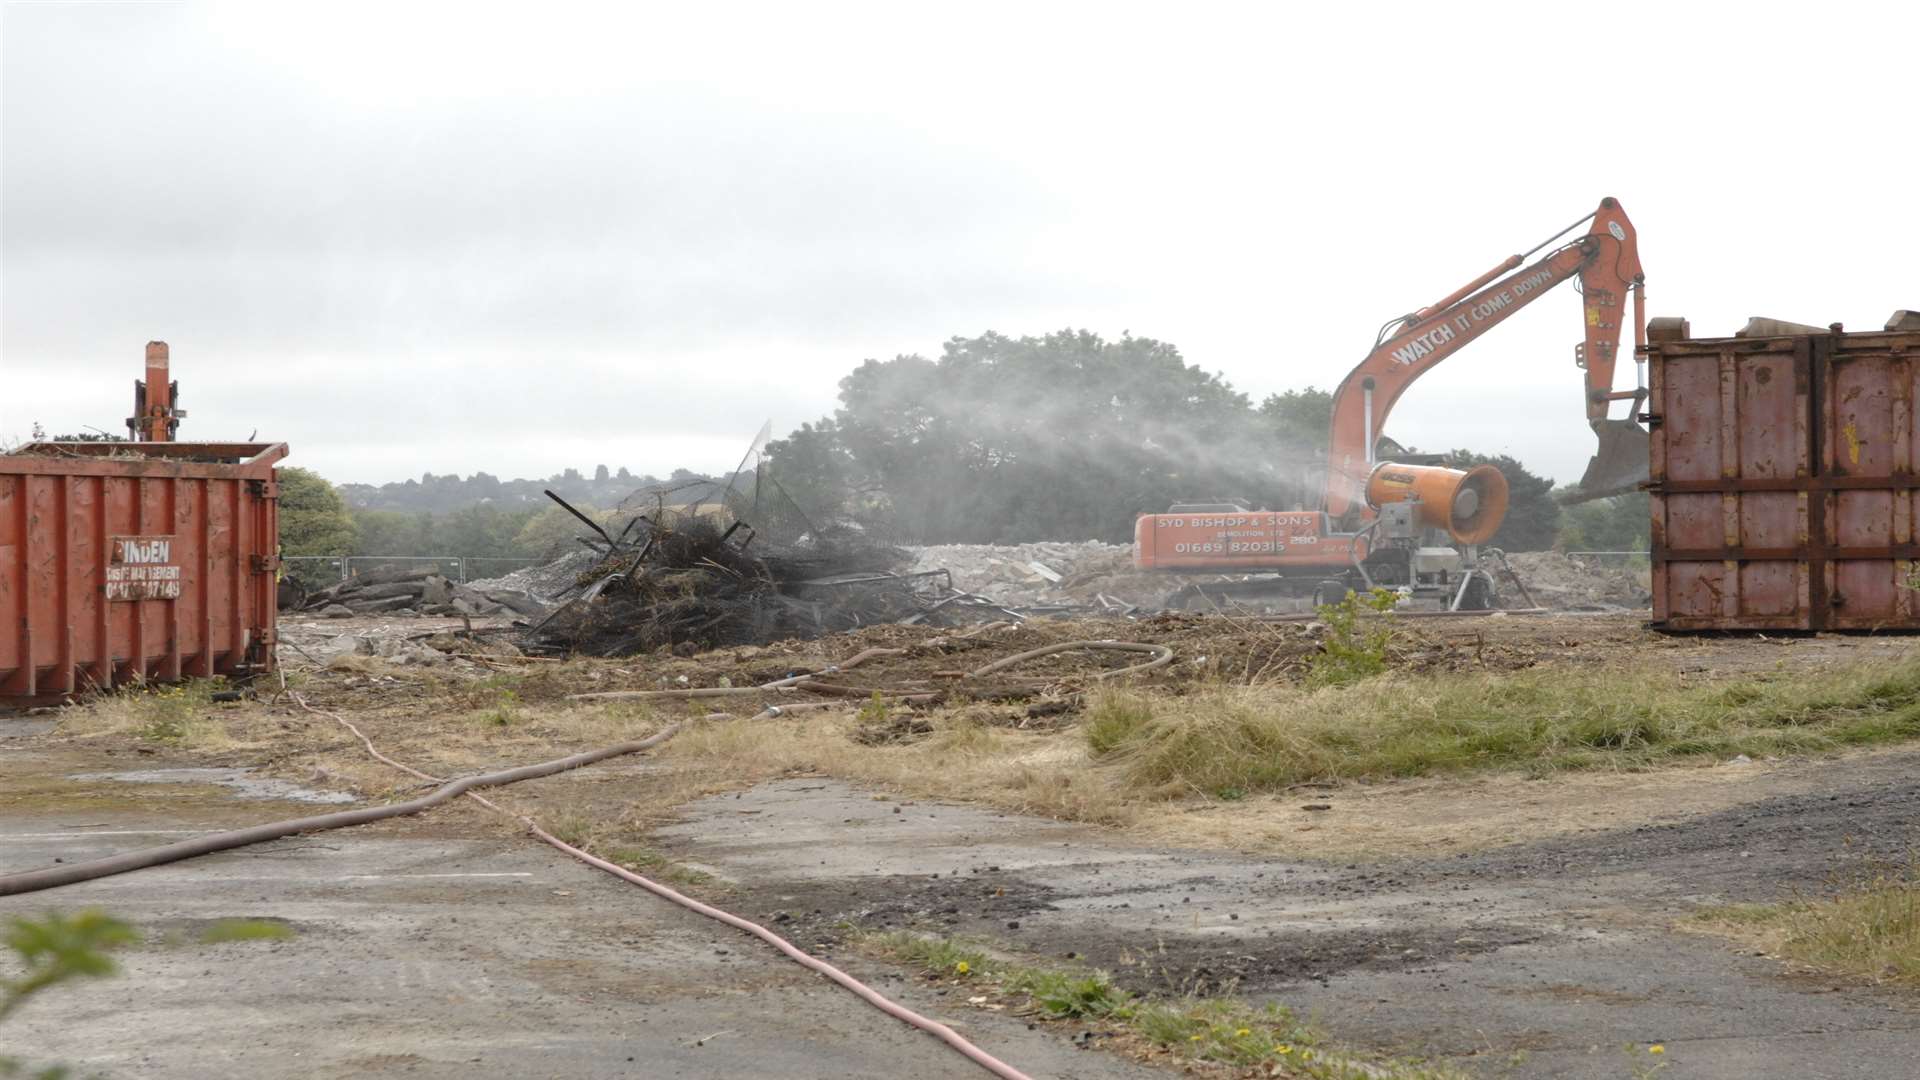 The former Danley Middle School being demolished in 2013